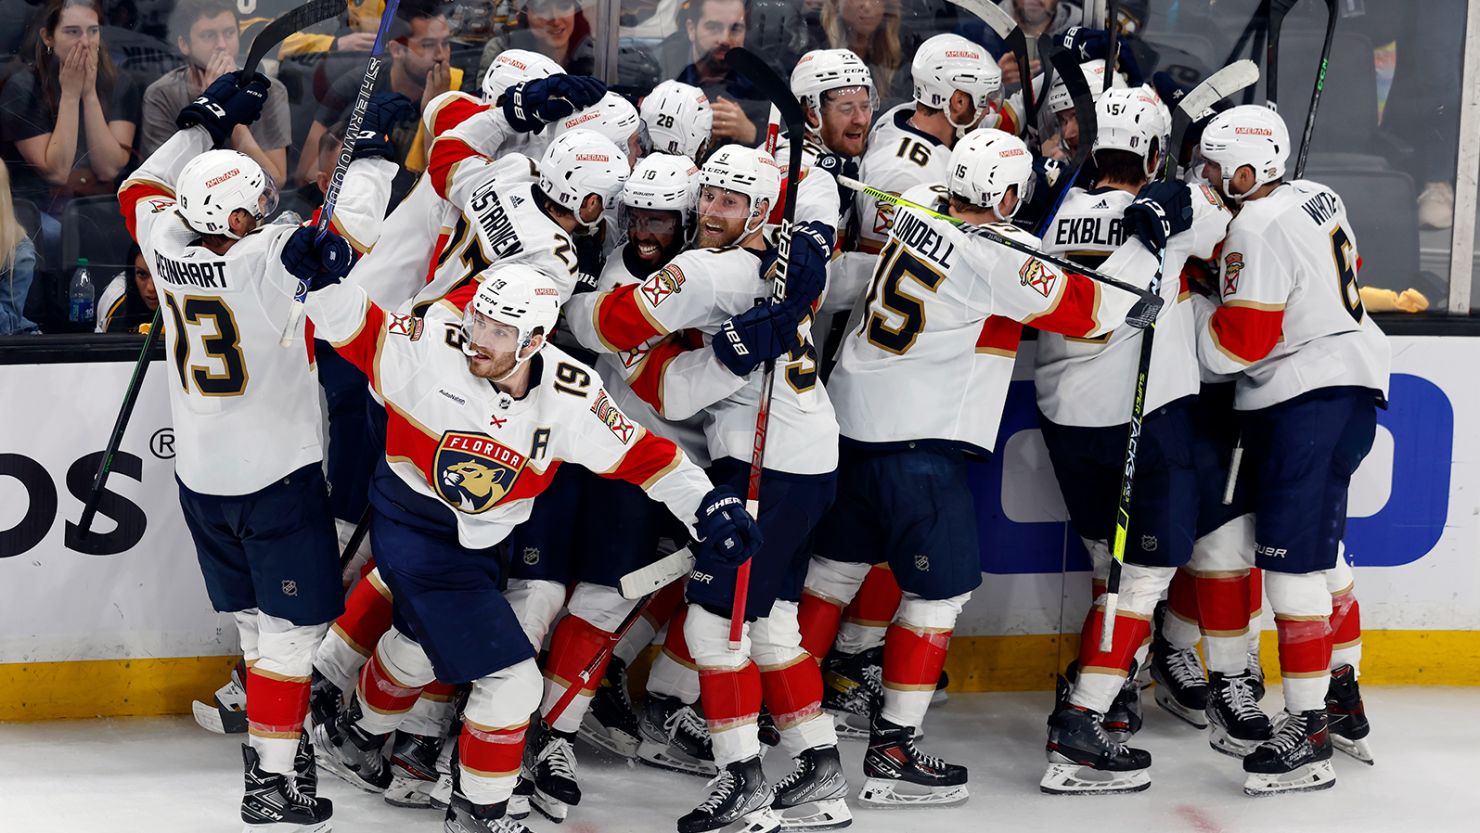 The Florida Panthers celebrate after defeating the Boston Bruins on a goal by Carter Verhaeghe in overtime during Game 7 of the NHL playoff series on Sunday, April 30, 2023, in Boston.